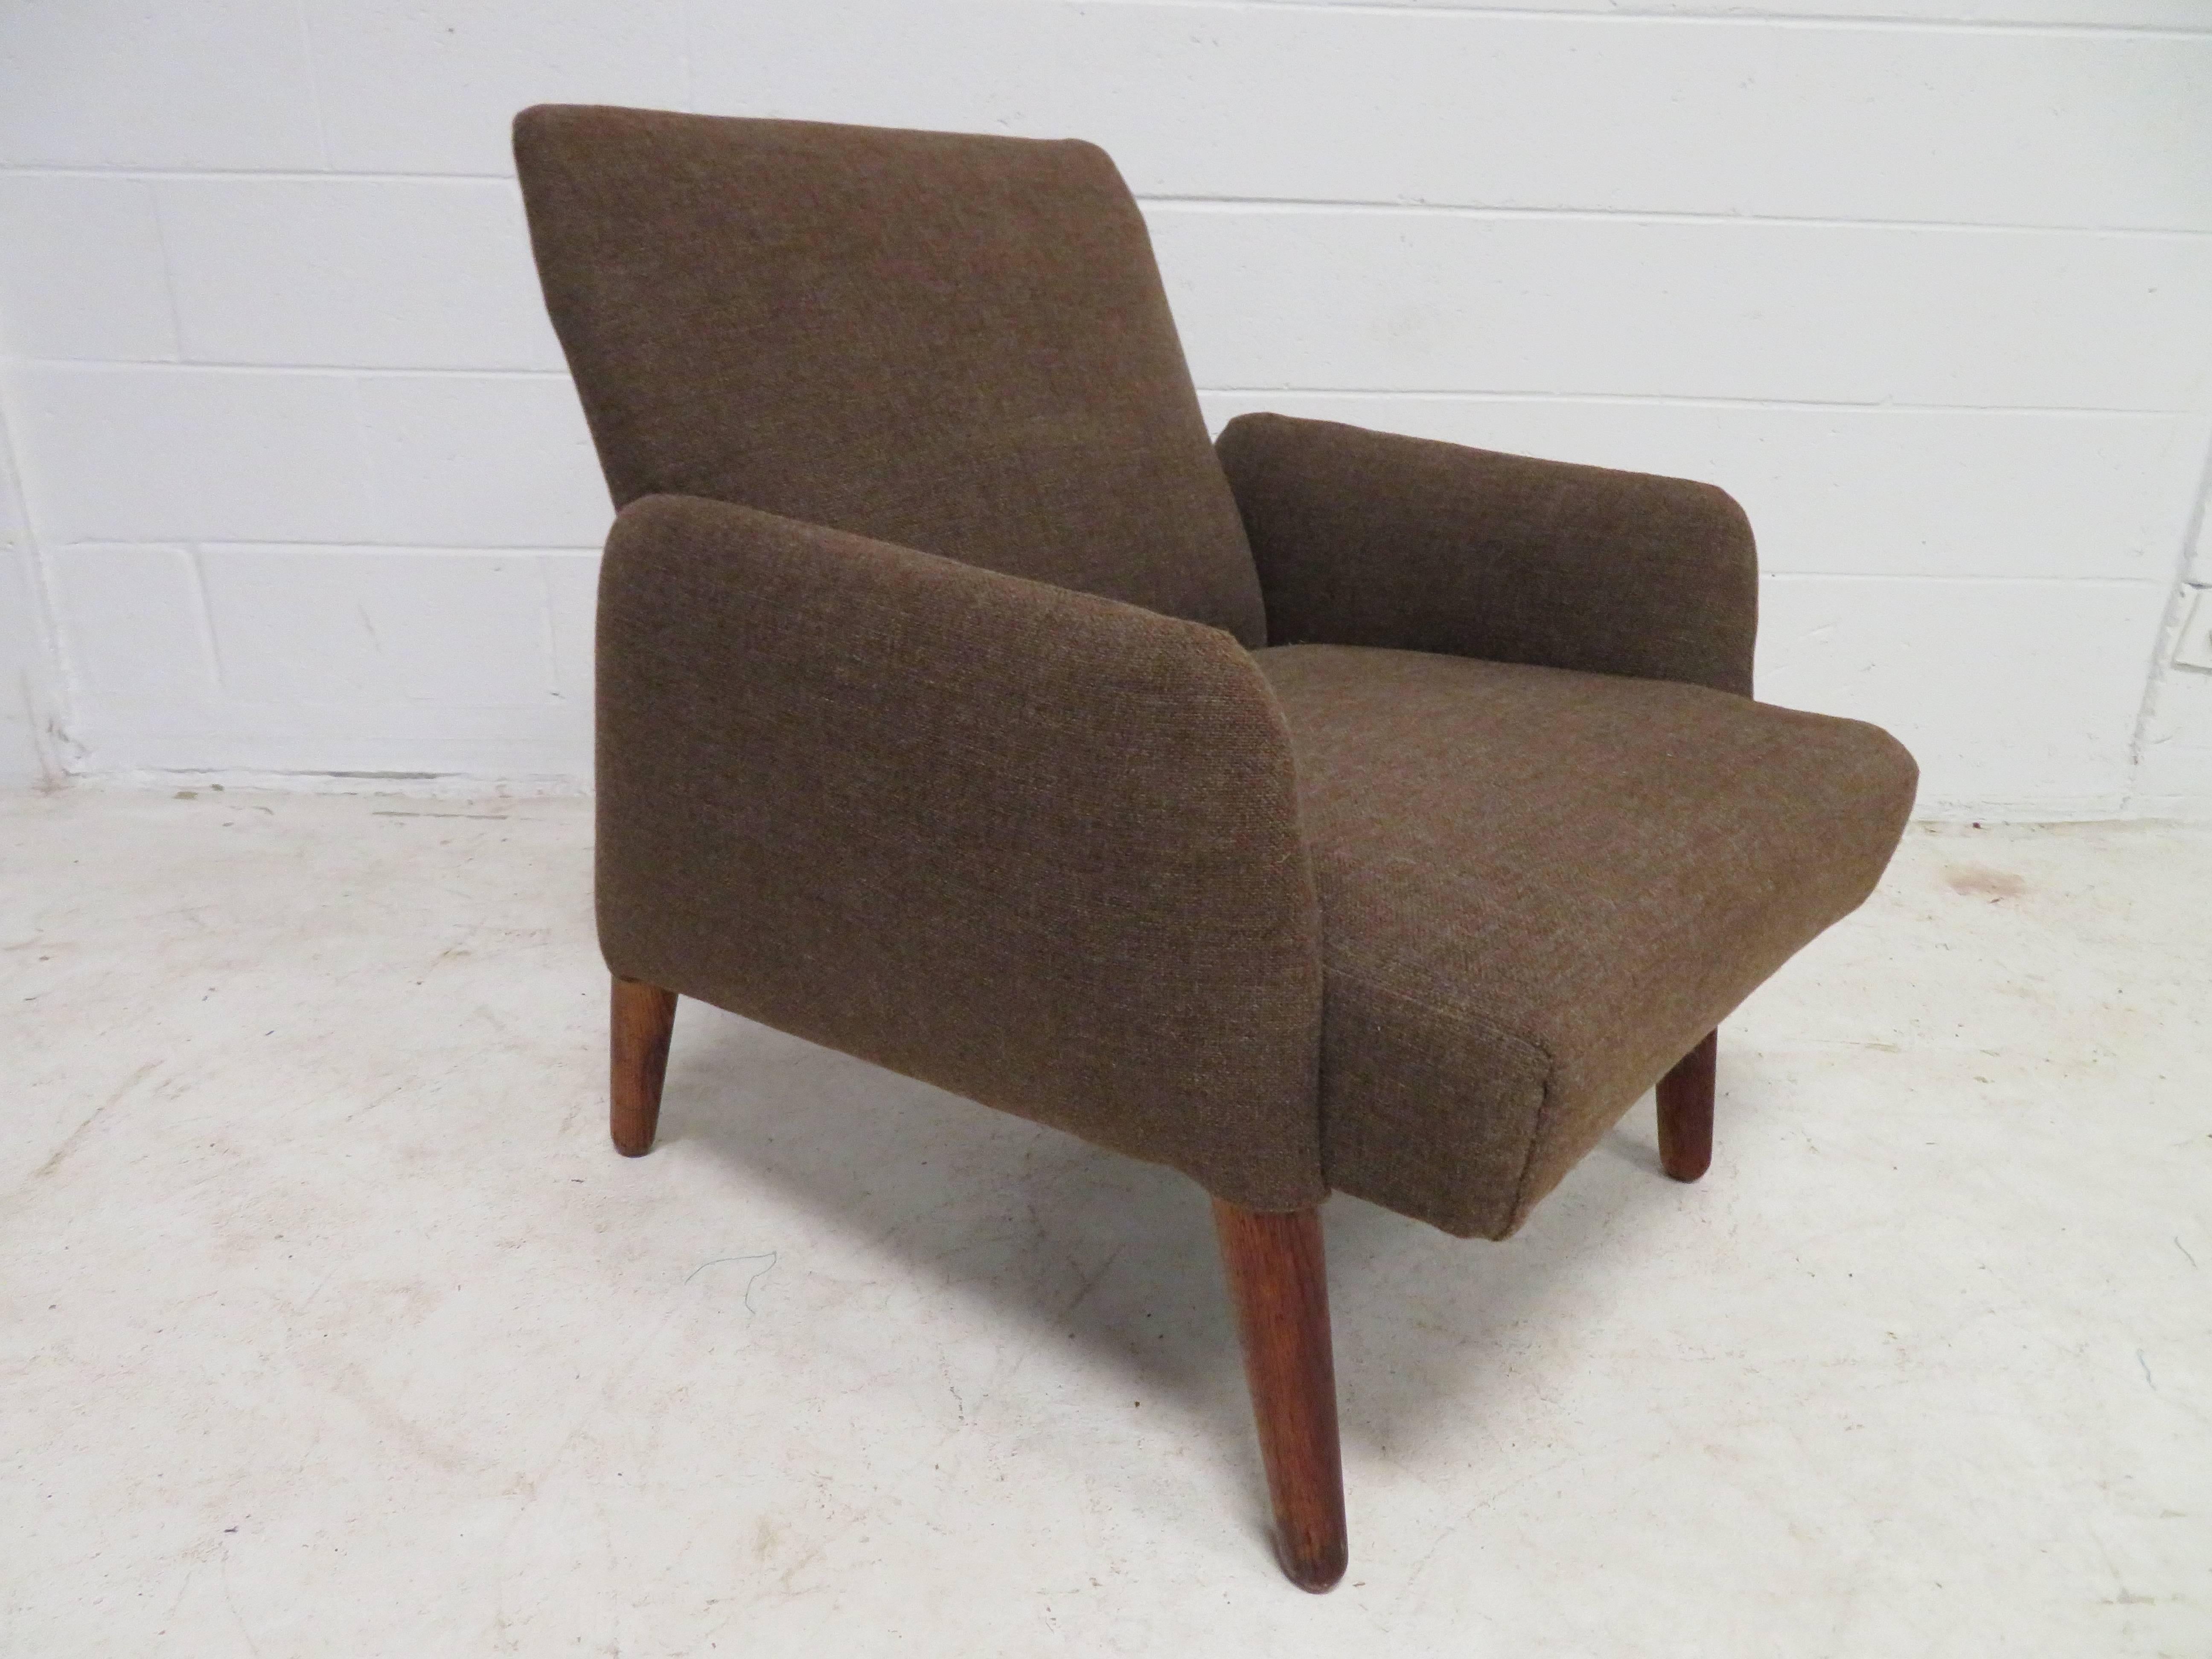 Handsome teak lounge chair. We love the exaggerated protruding back legs that almost look like turkey legs.